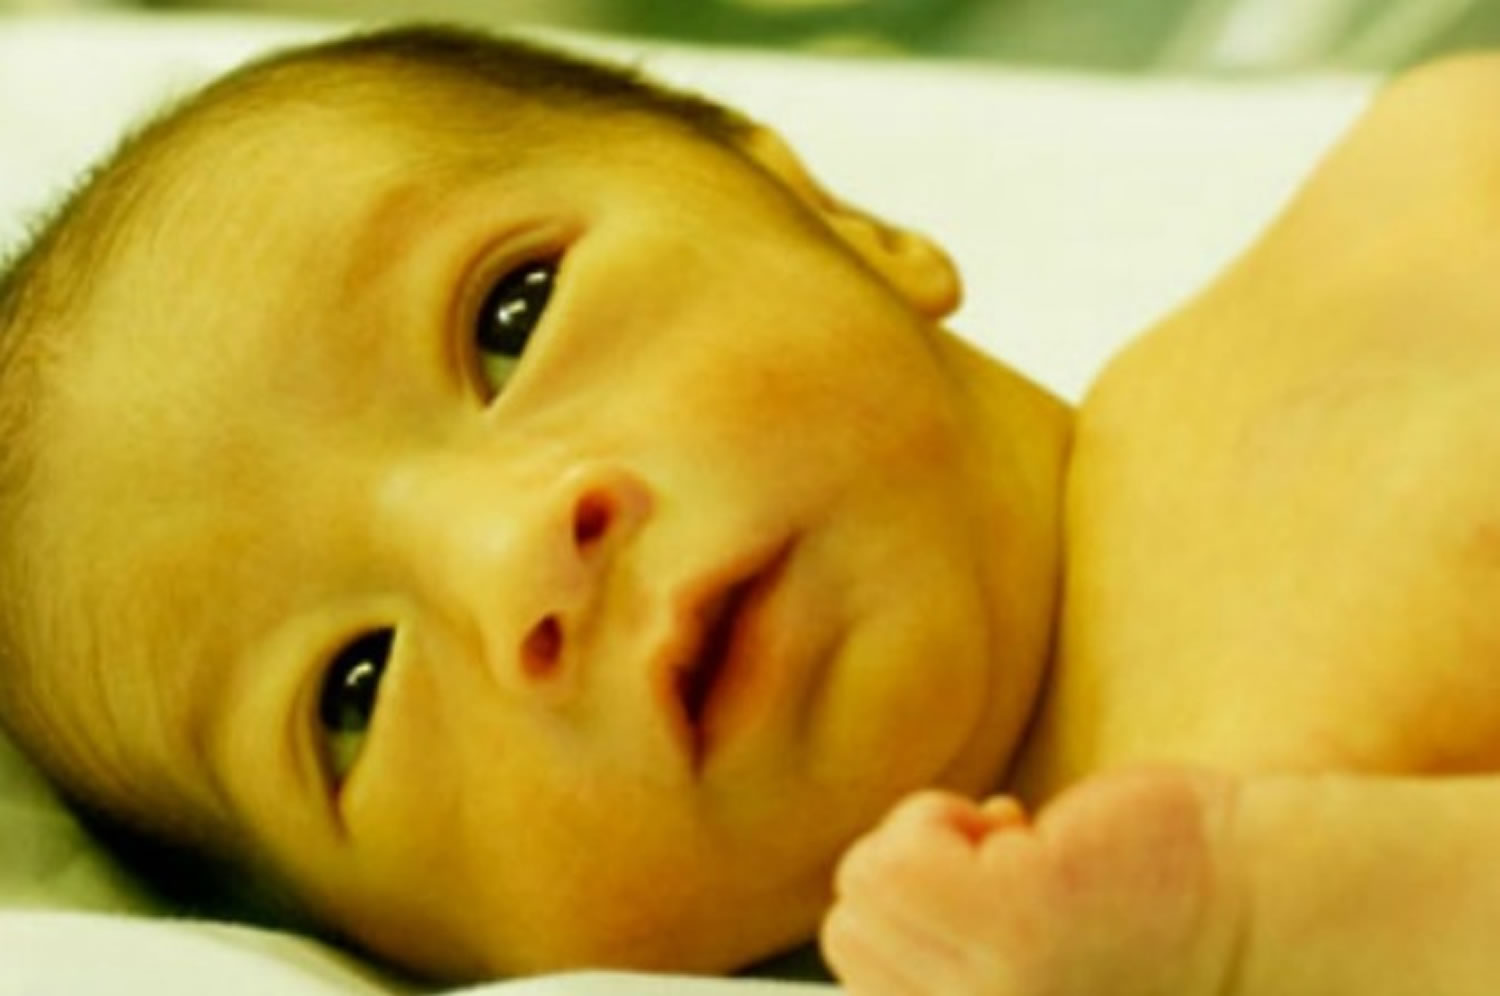  The myths around the newborns continue to put countless number of babies at risk of neonatal jaundice